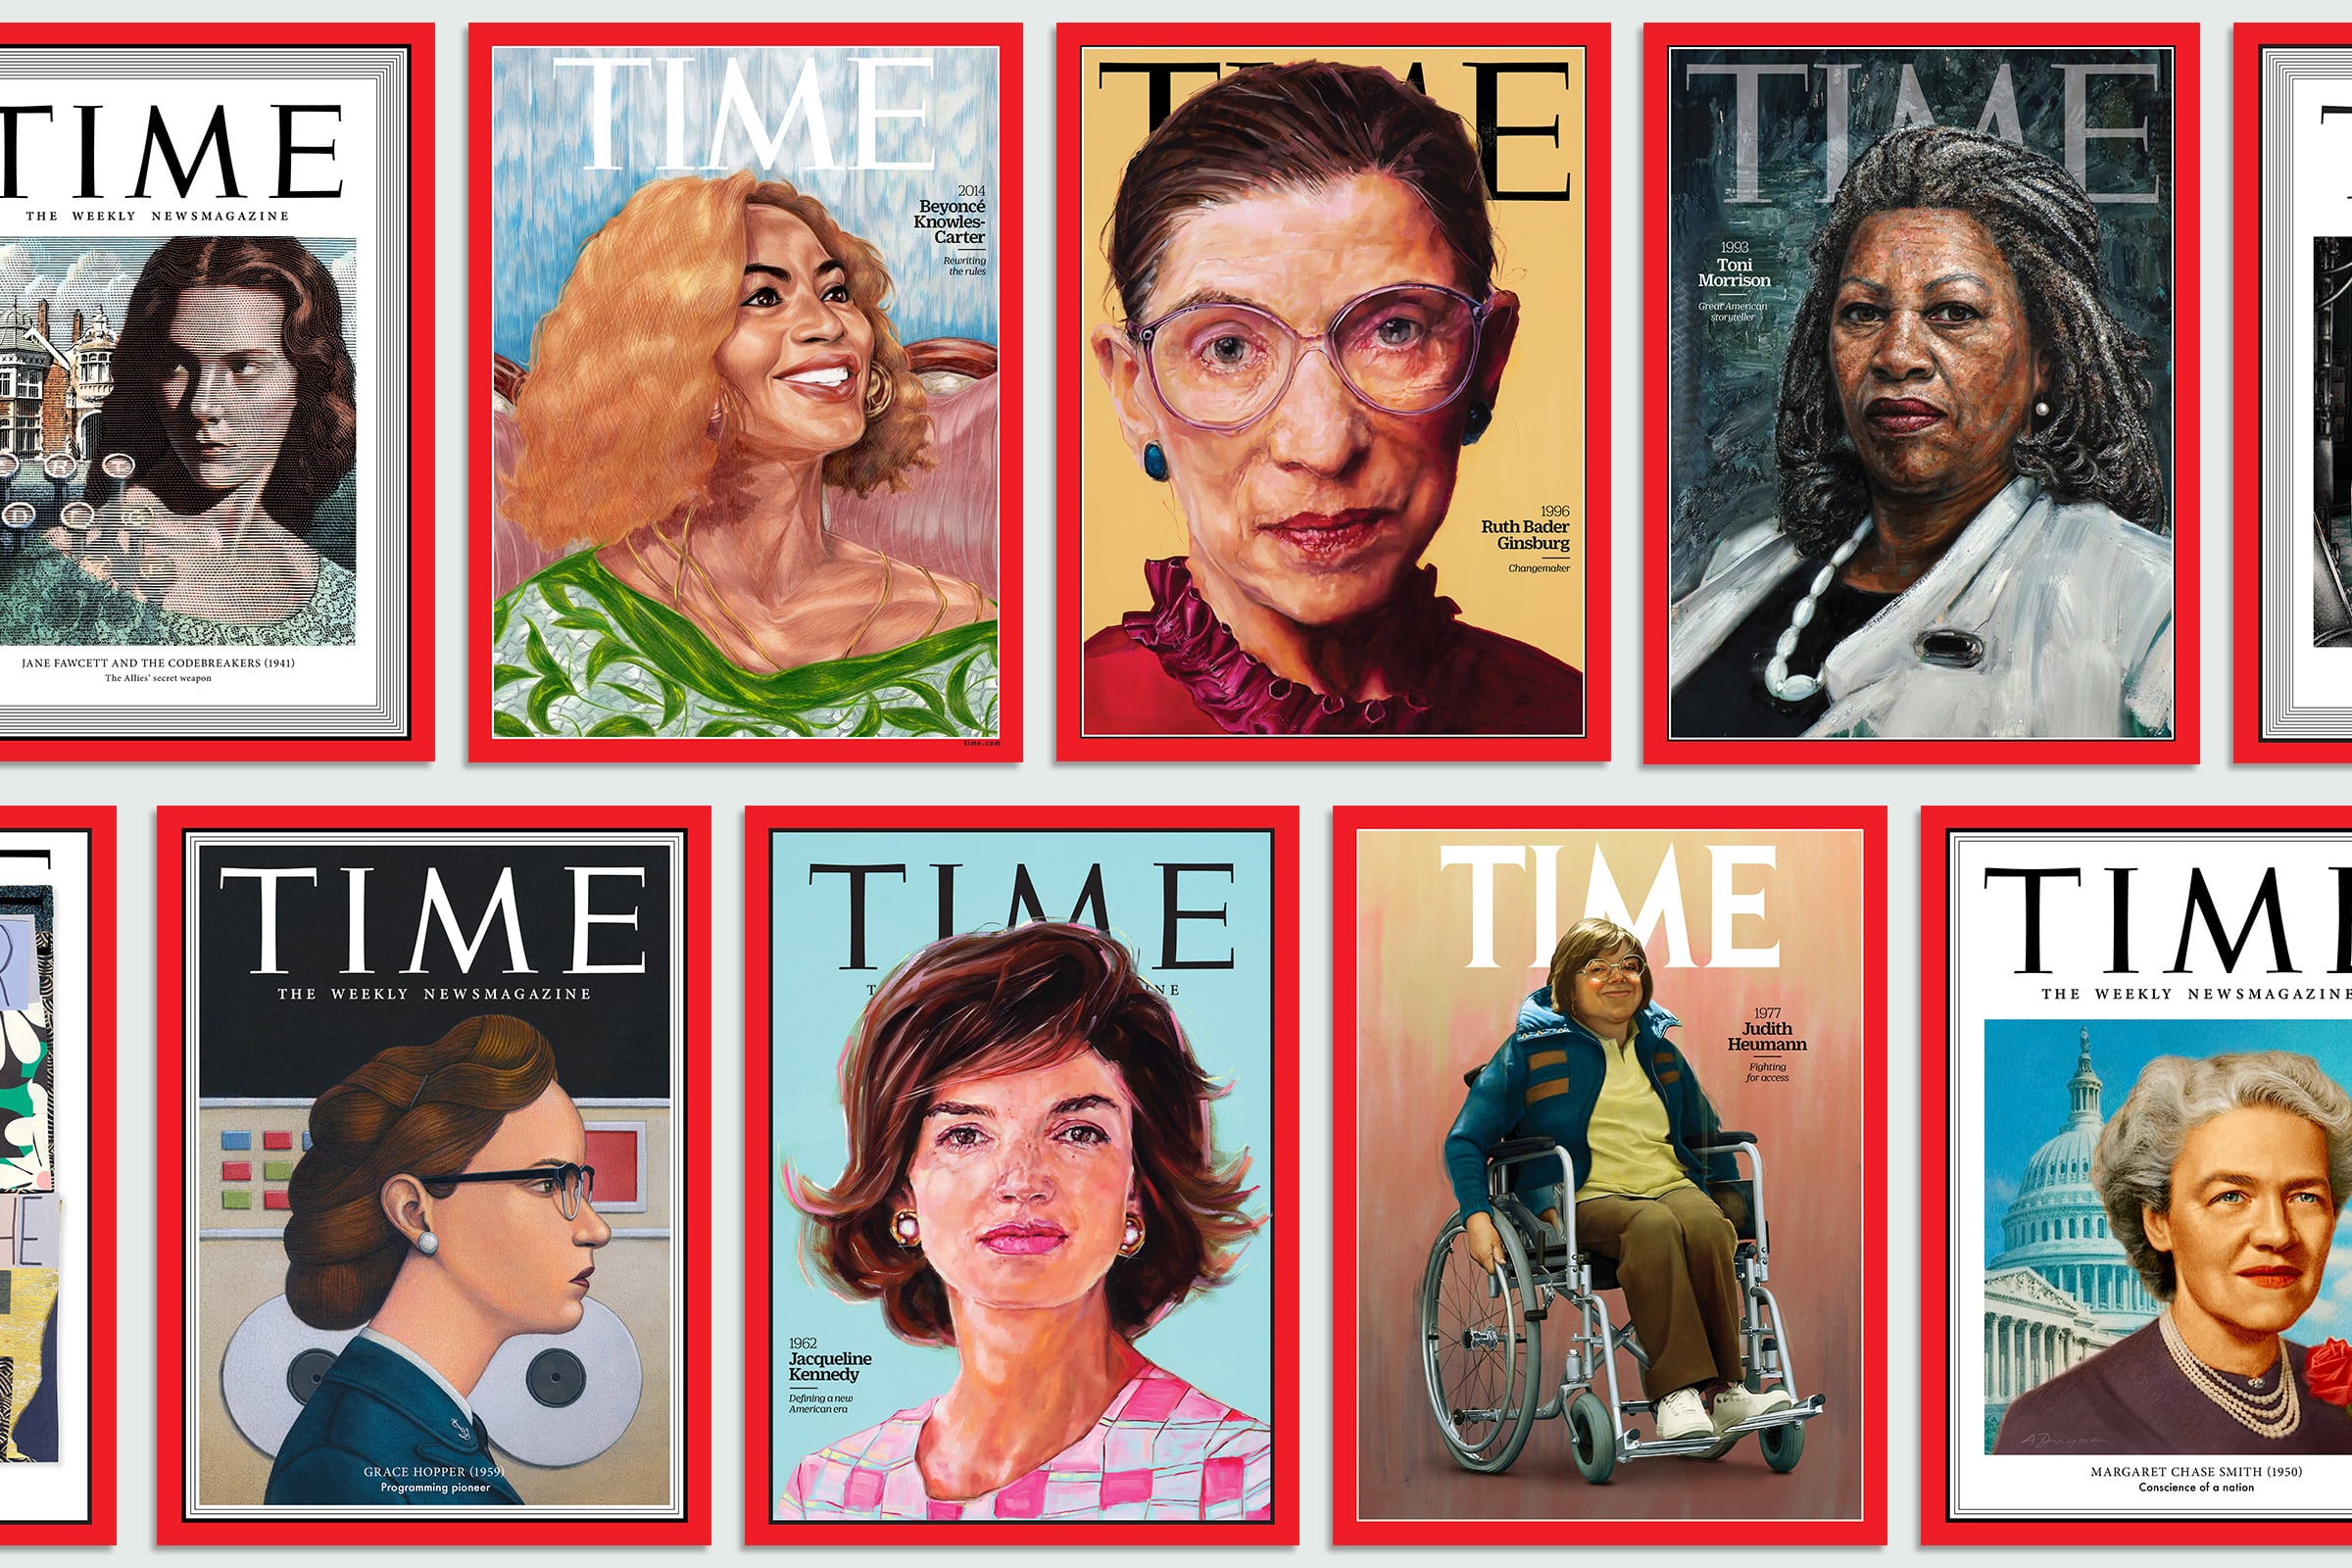 Women of the Year